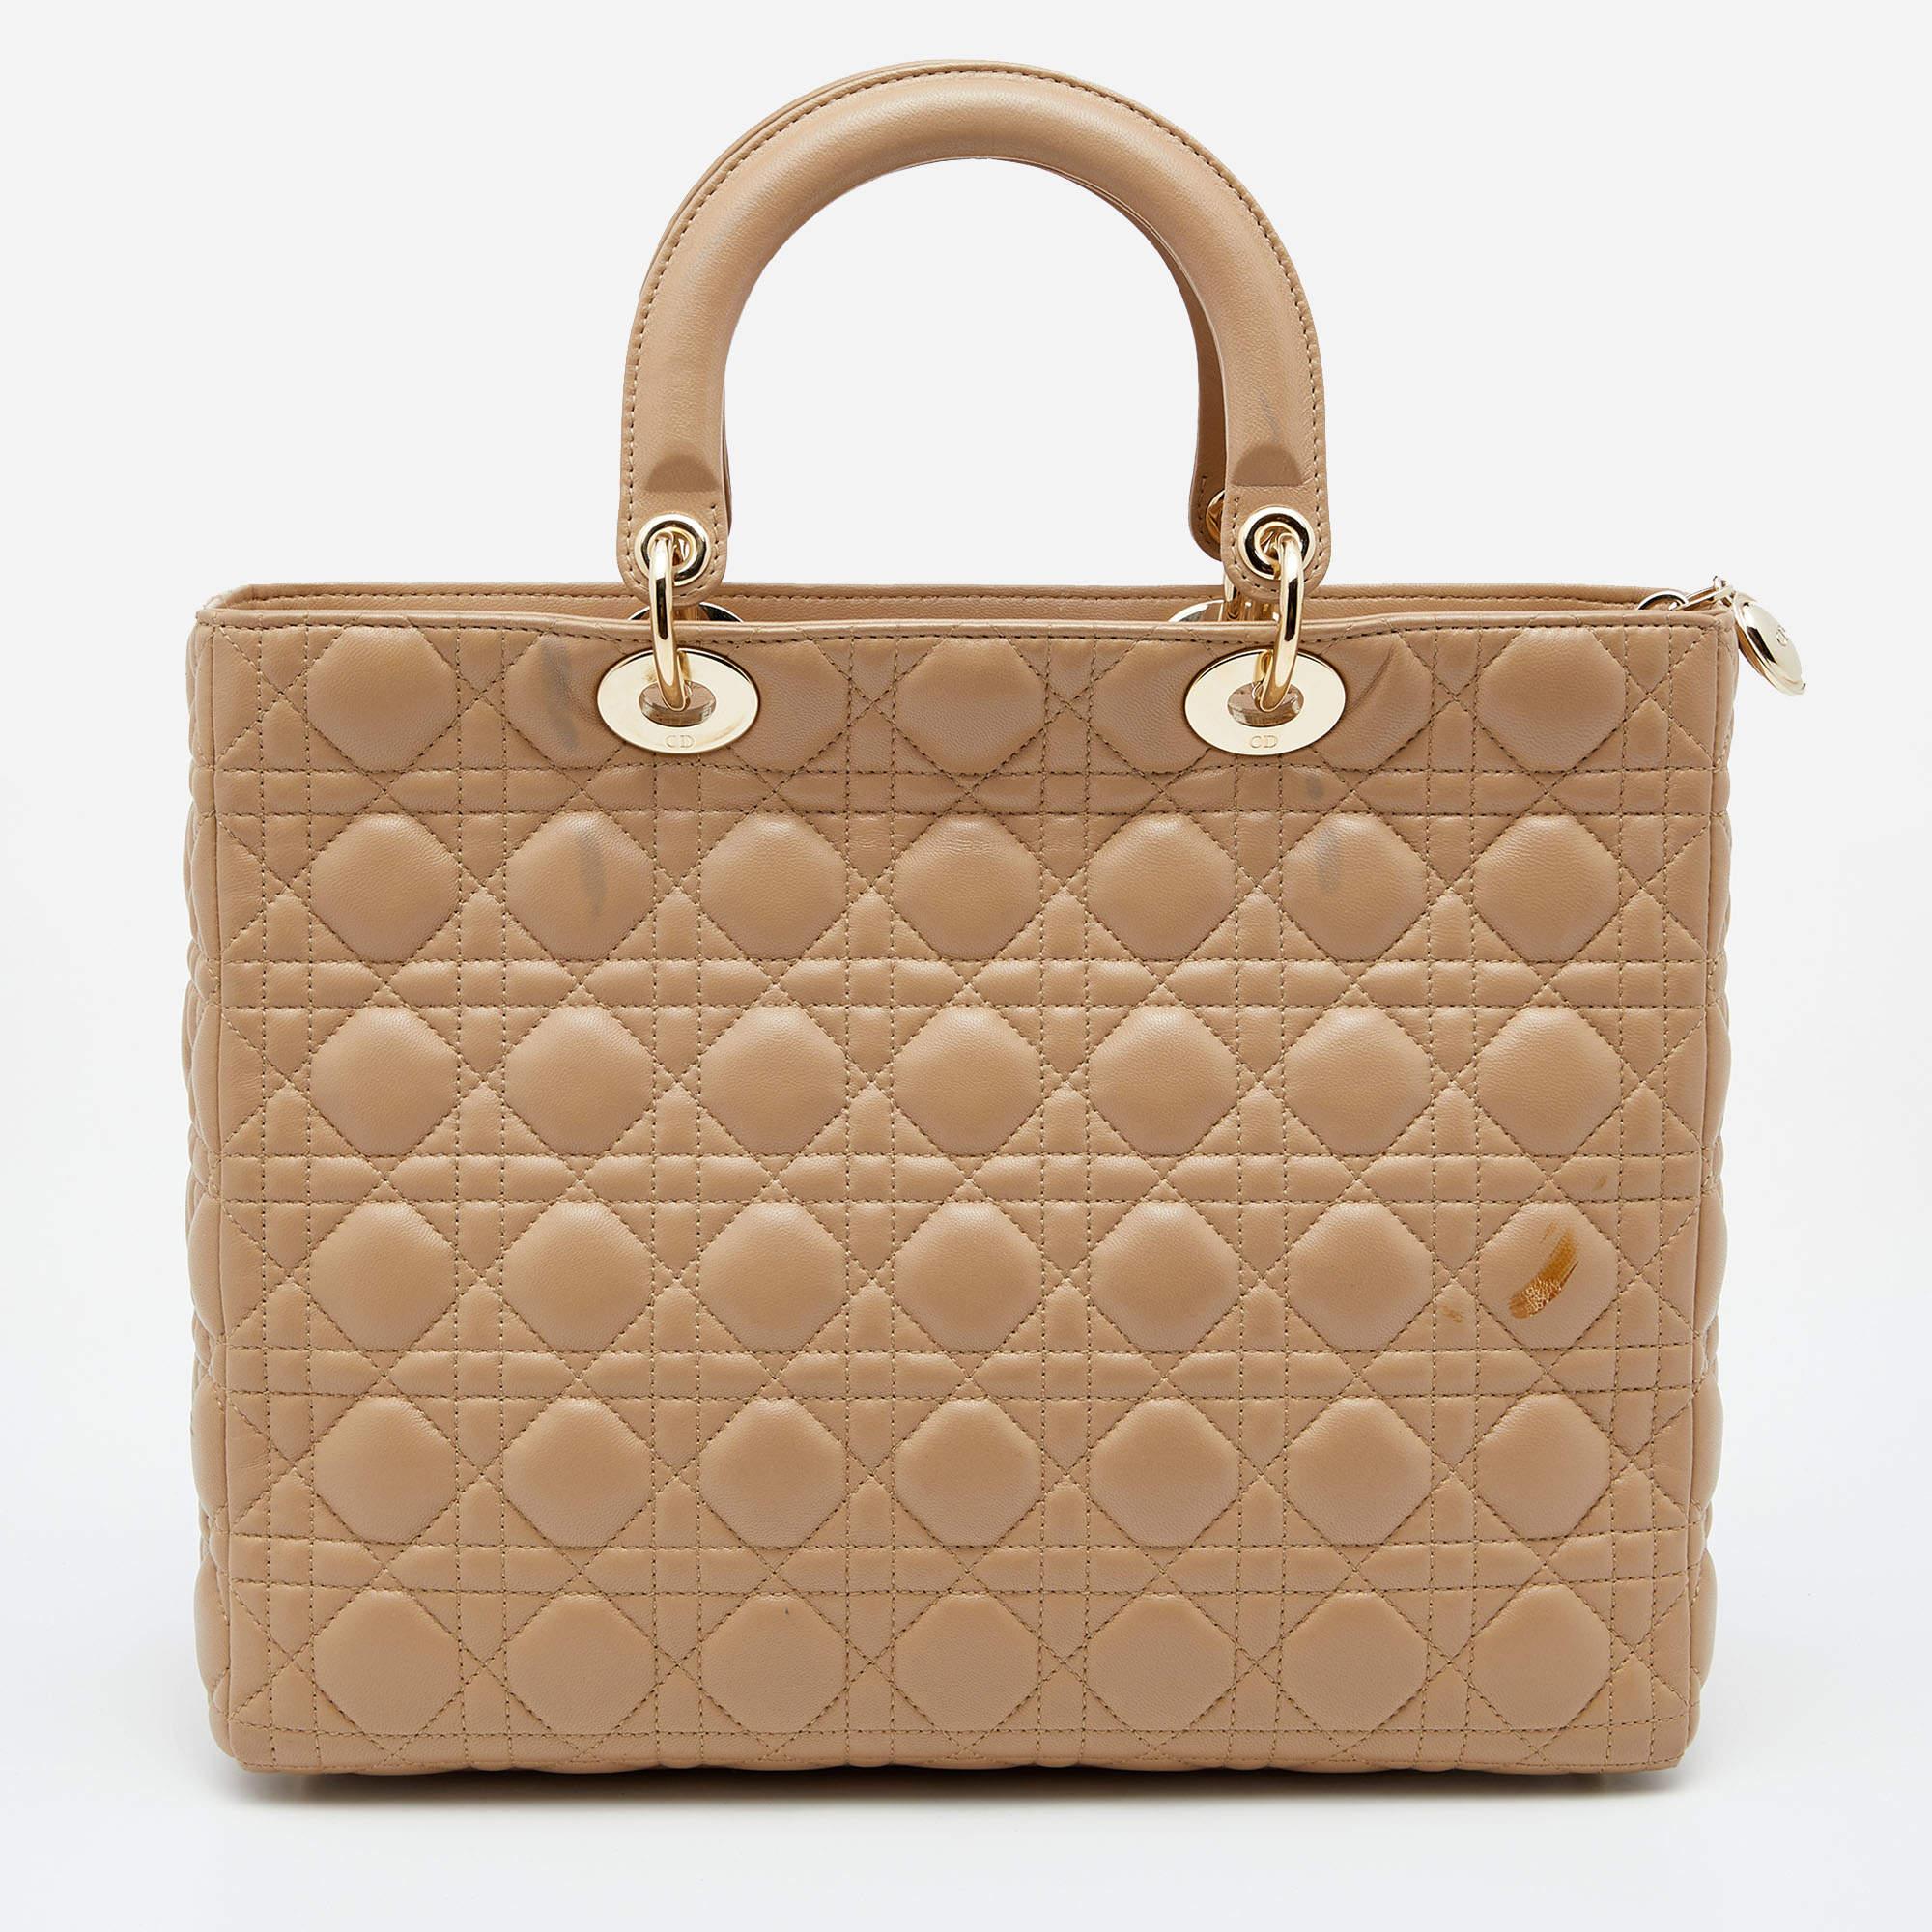 A timeless status and great design mark the Lady Dior tote. It is an iconic bag that people continue to invest in to this day. We have here this Lady Dior tote crafted from Cannage leather. The bag is complete with two top handles, a shoulder strap,